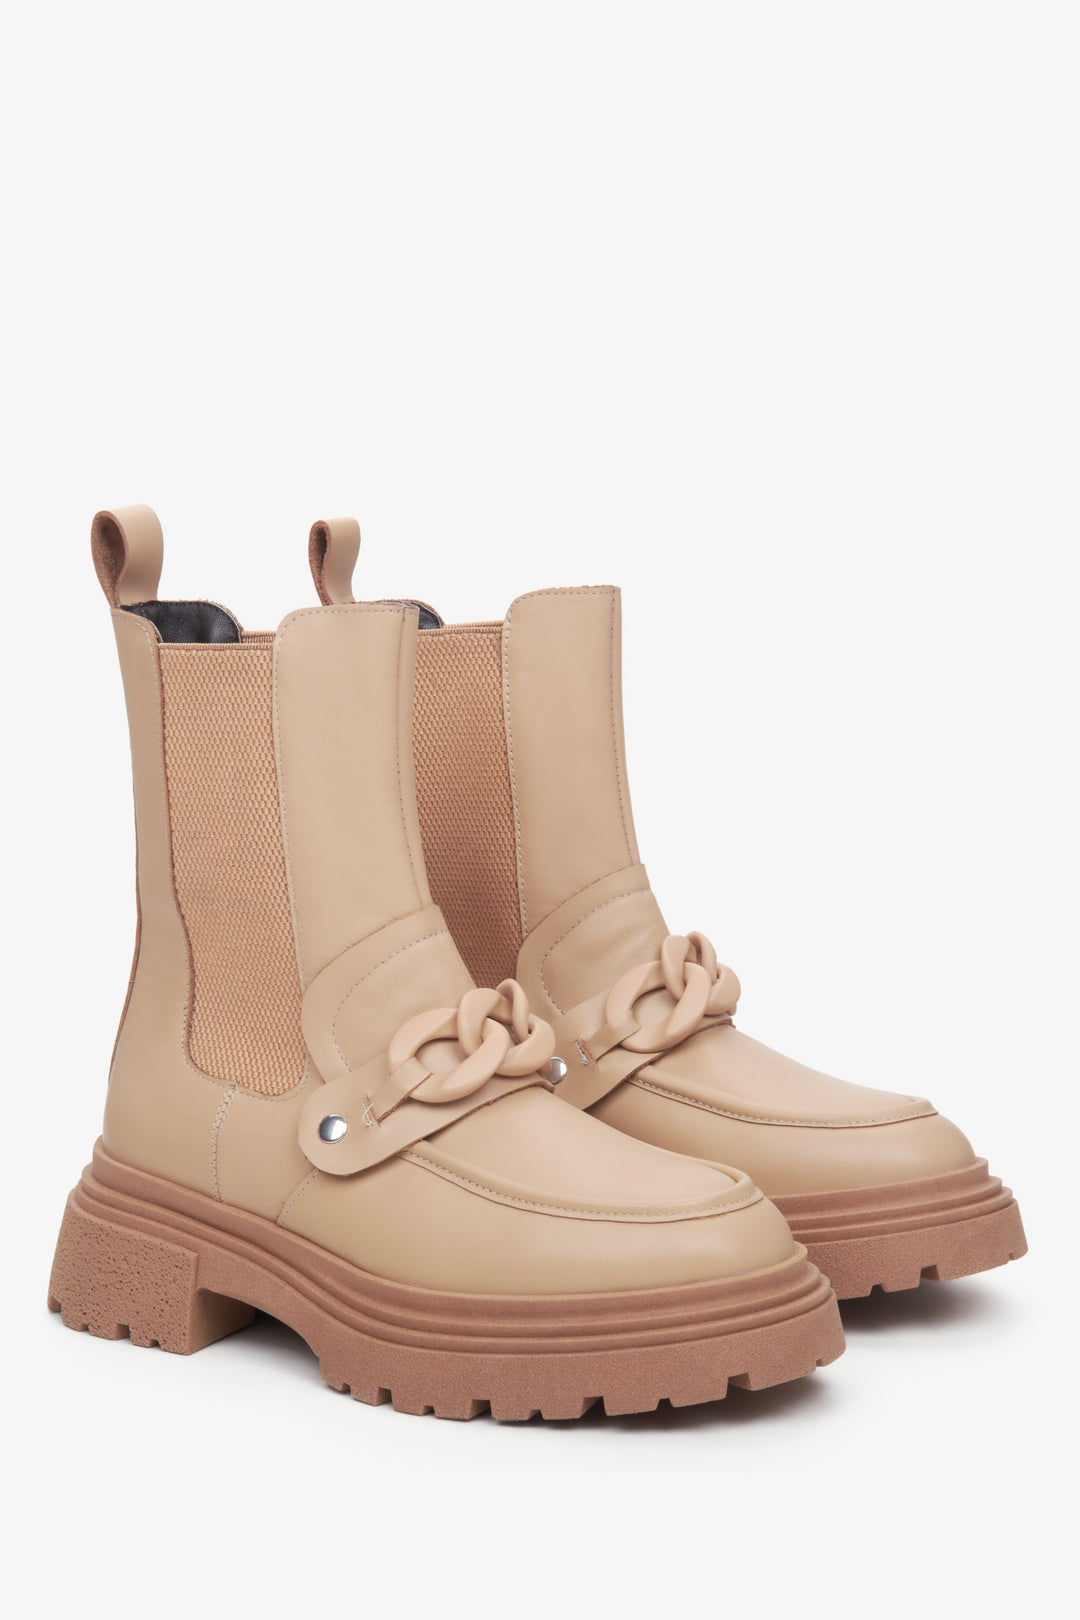 Women's beige leather Chelsea boots with ornament.